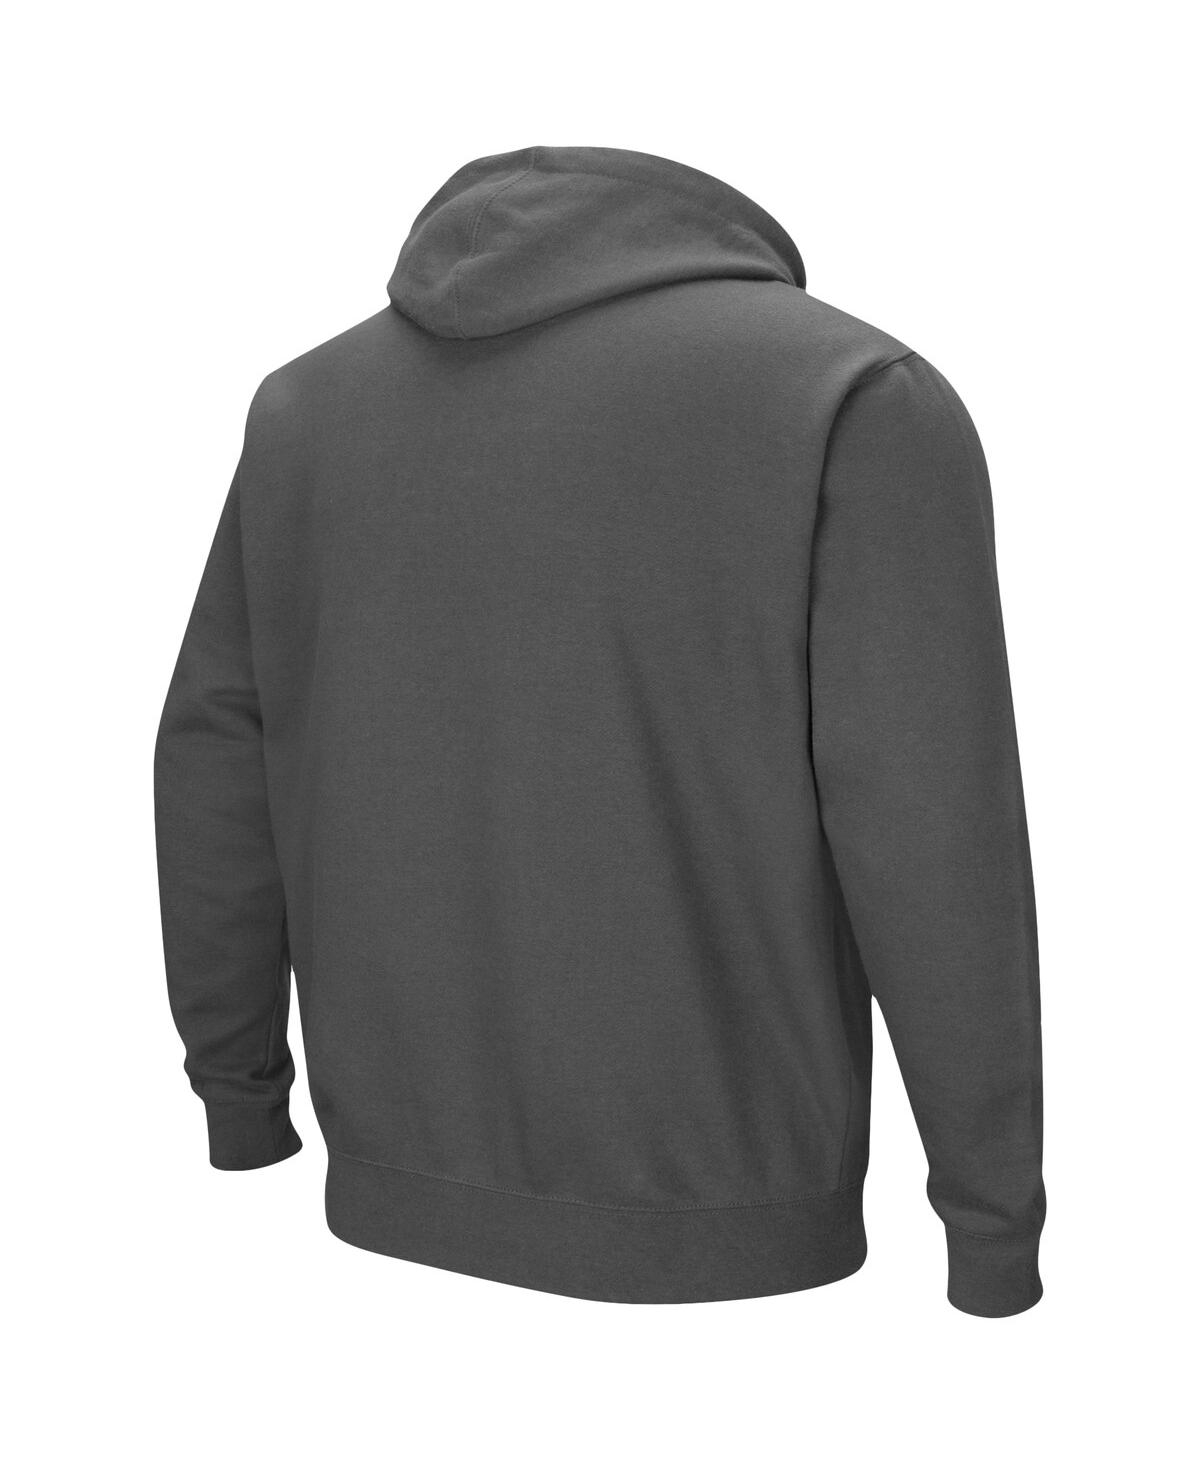 Shop Colosseum Men's  Charcoal Army Black Knights Arch And Logo 3.0 Pullover Hoodie